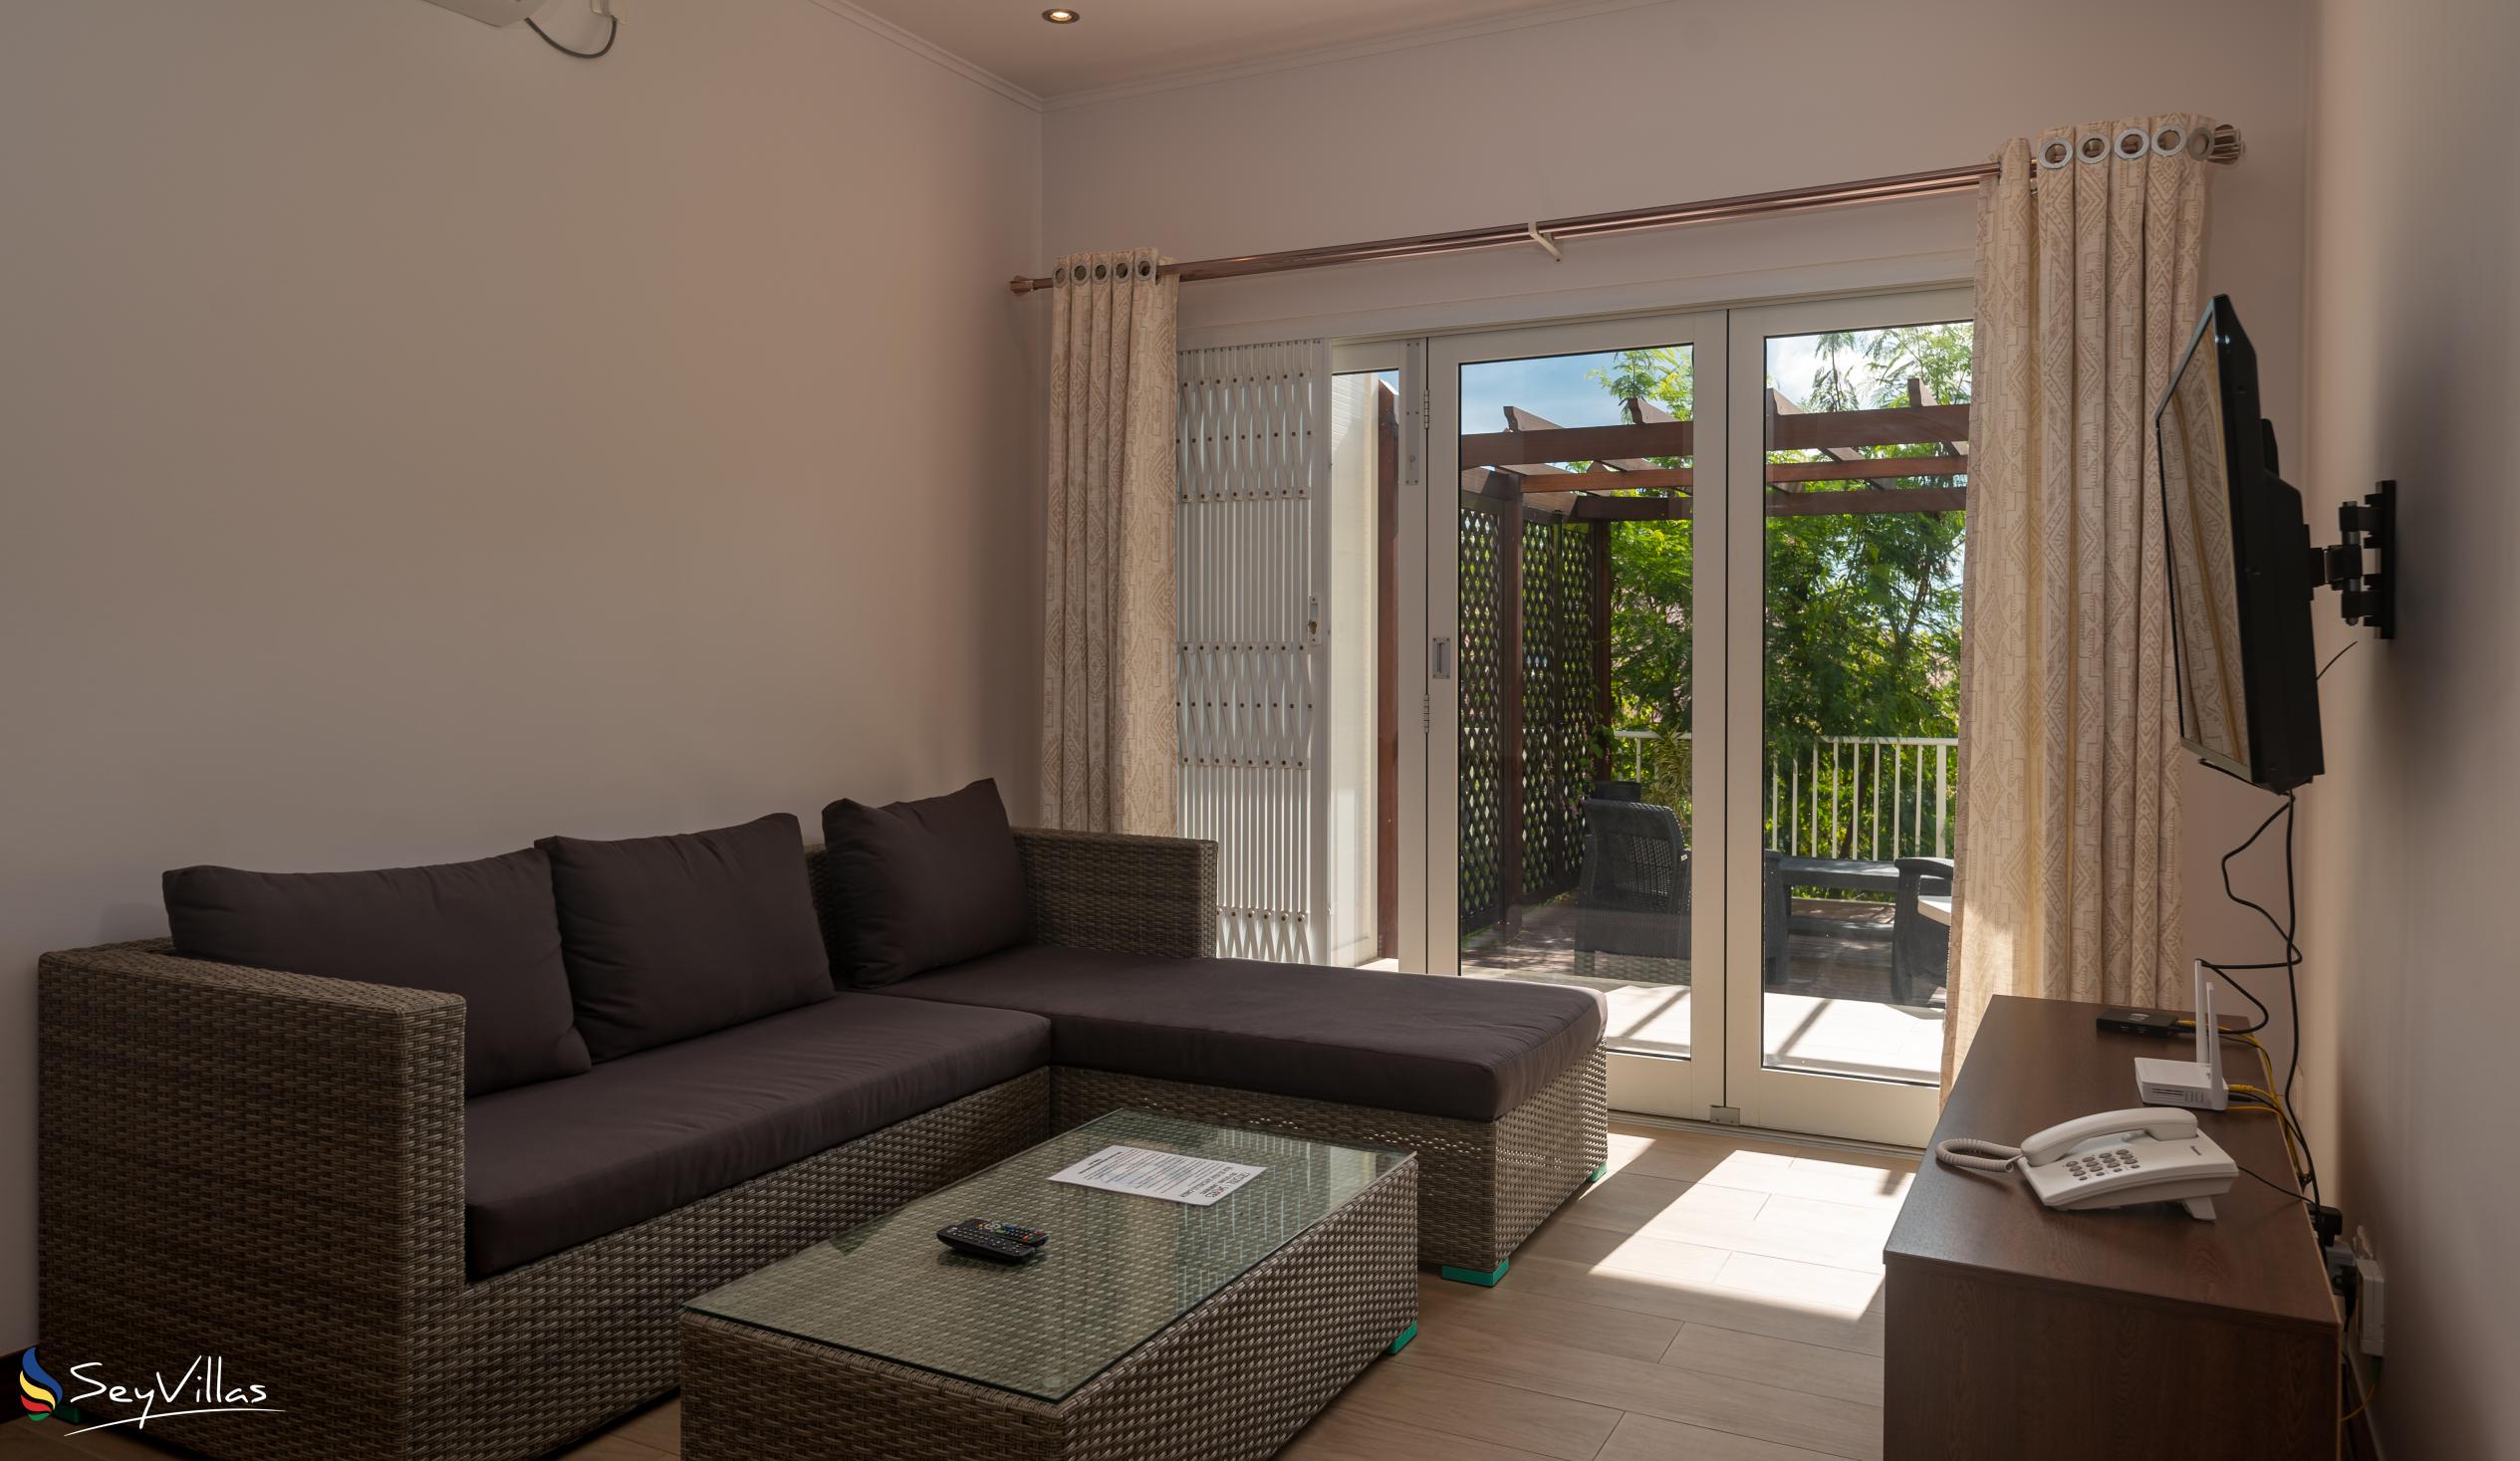 Photo 60: Crystal Shores Self Catering Apartments - Garden View Apartment - Mahé (Seychelles)